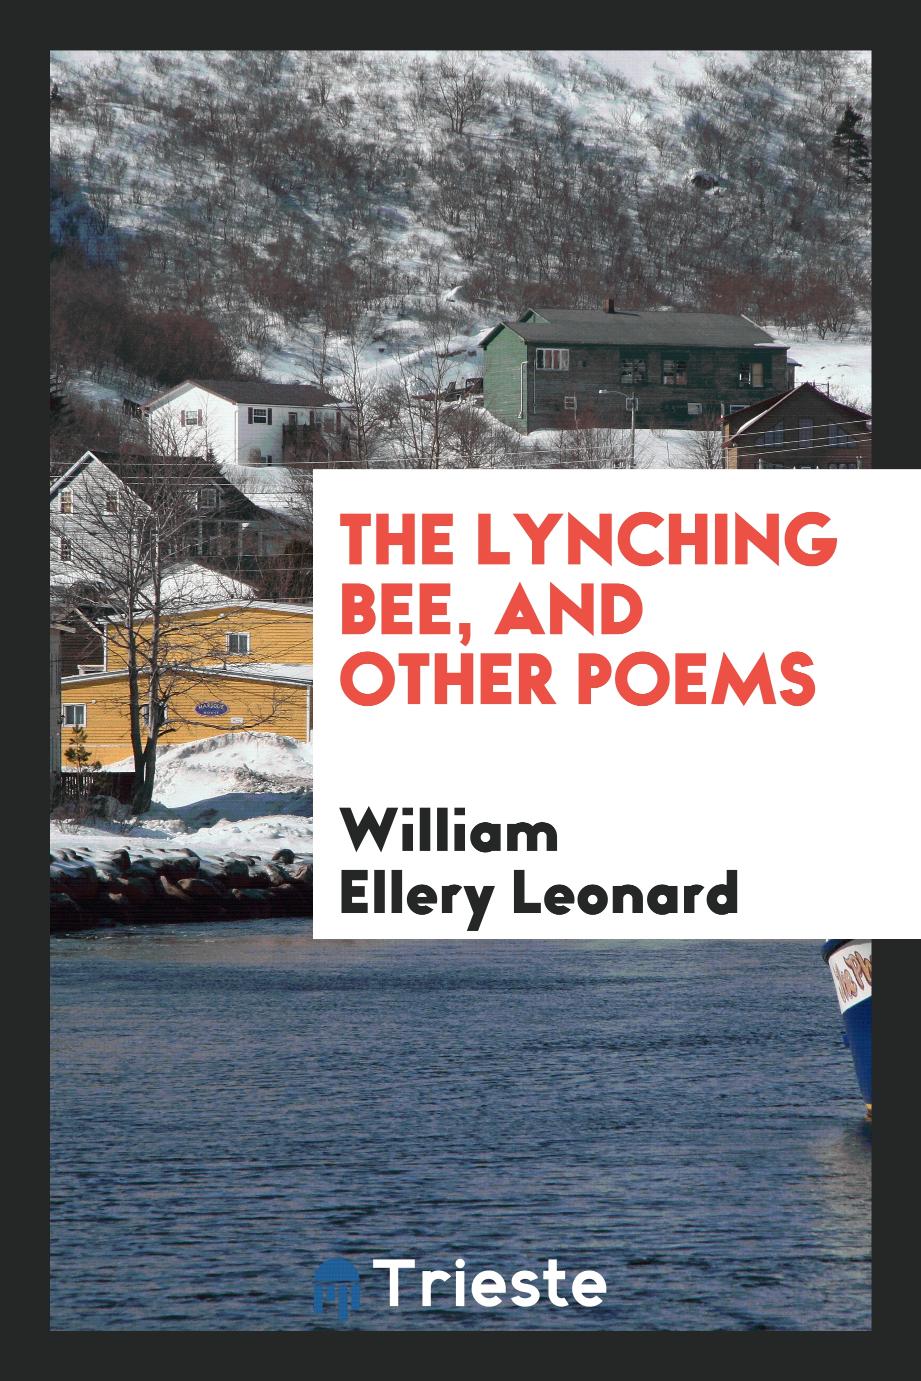 The Lynching Bee, and Other Poems